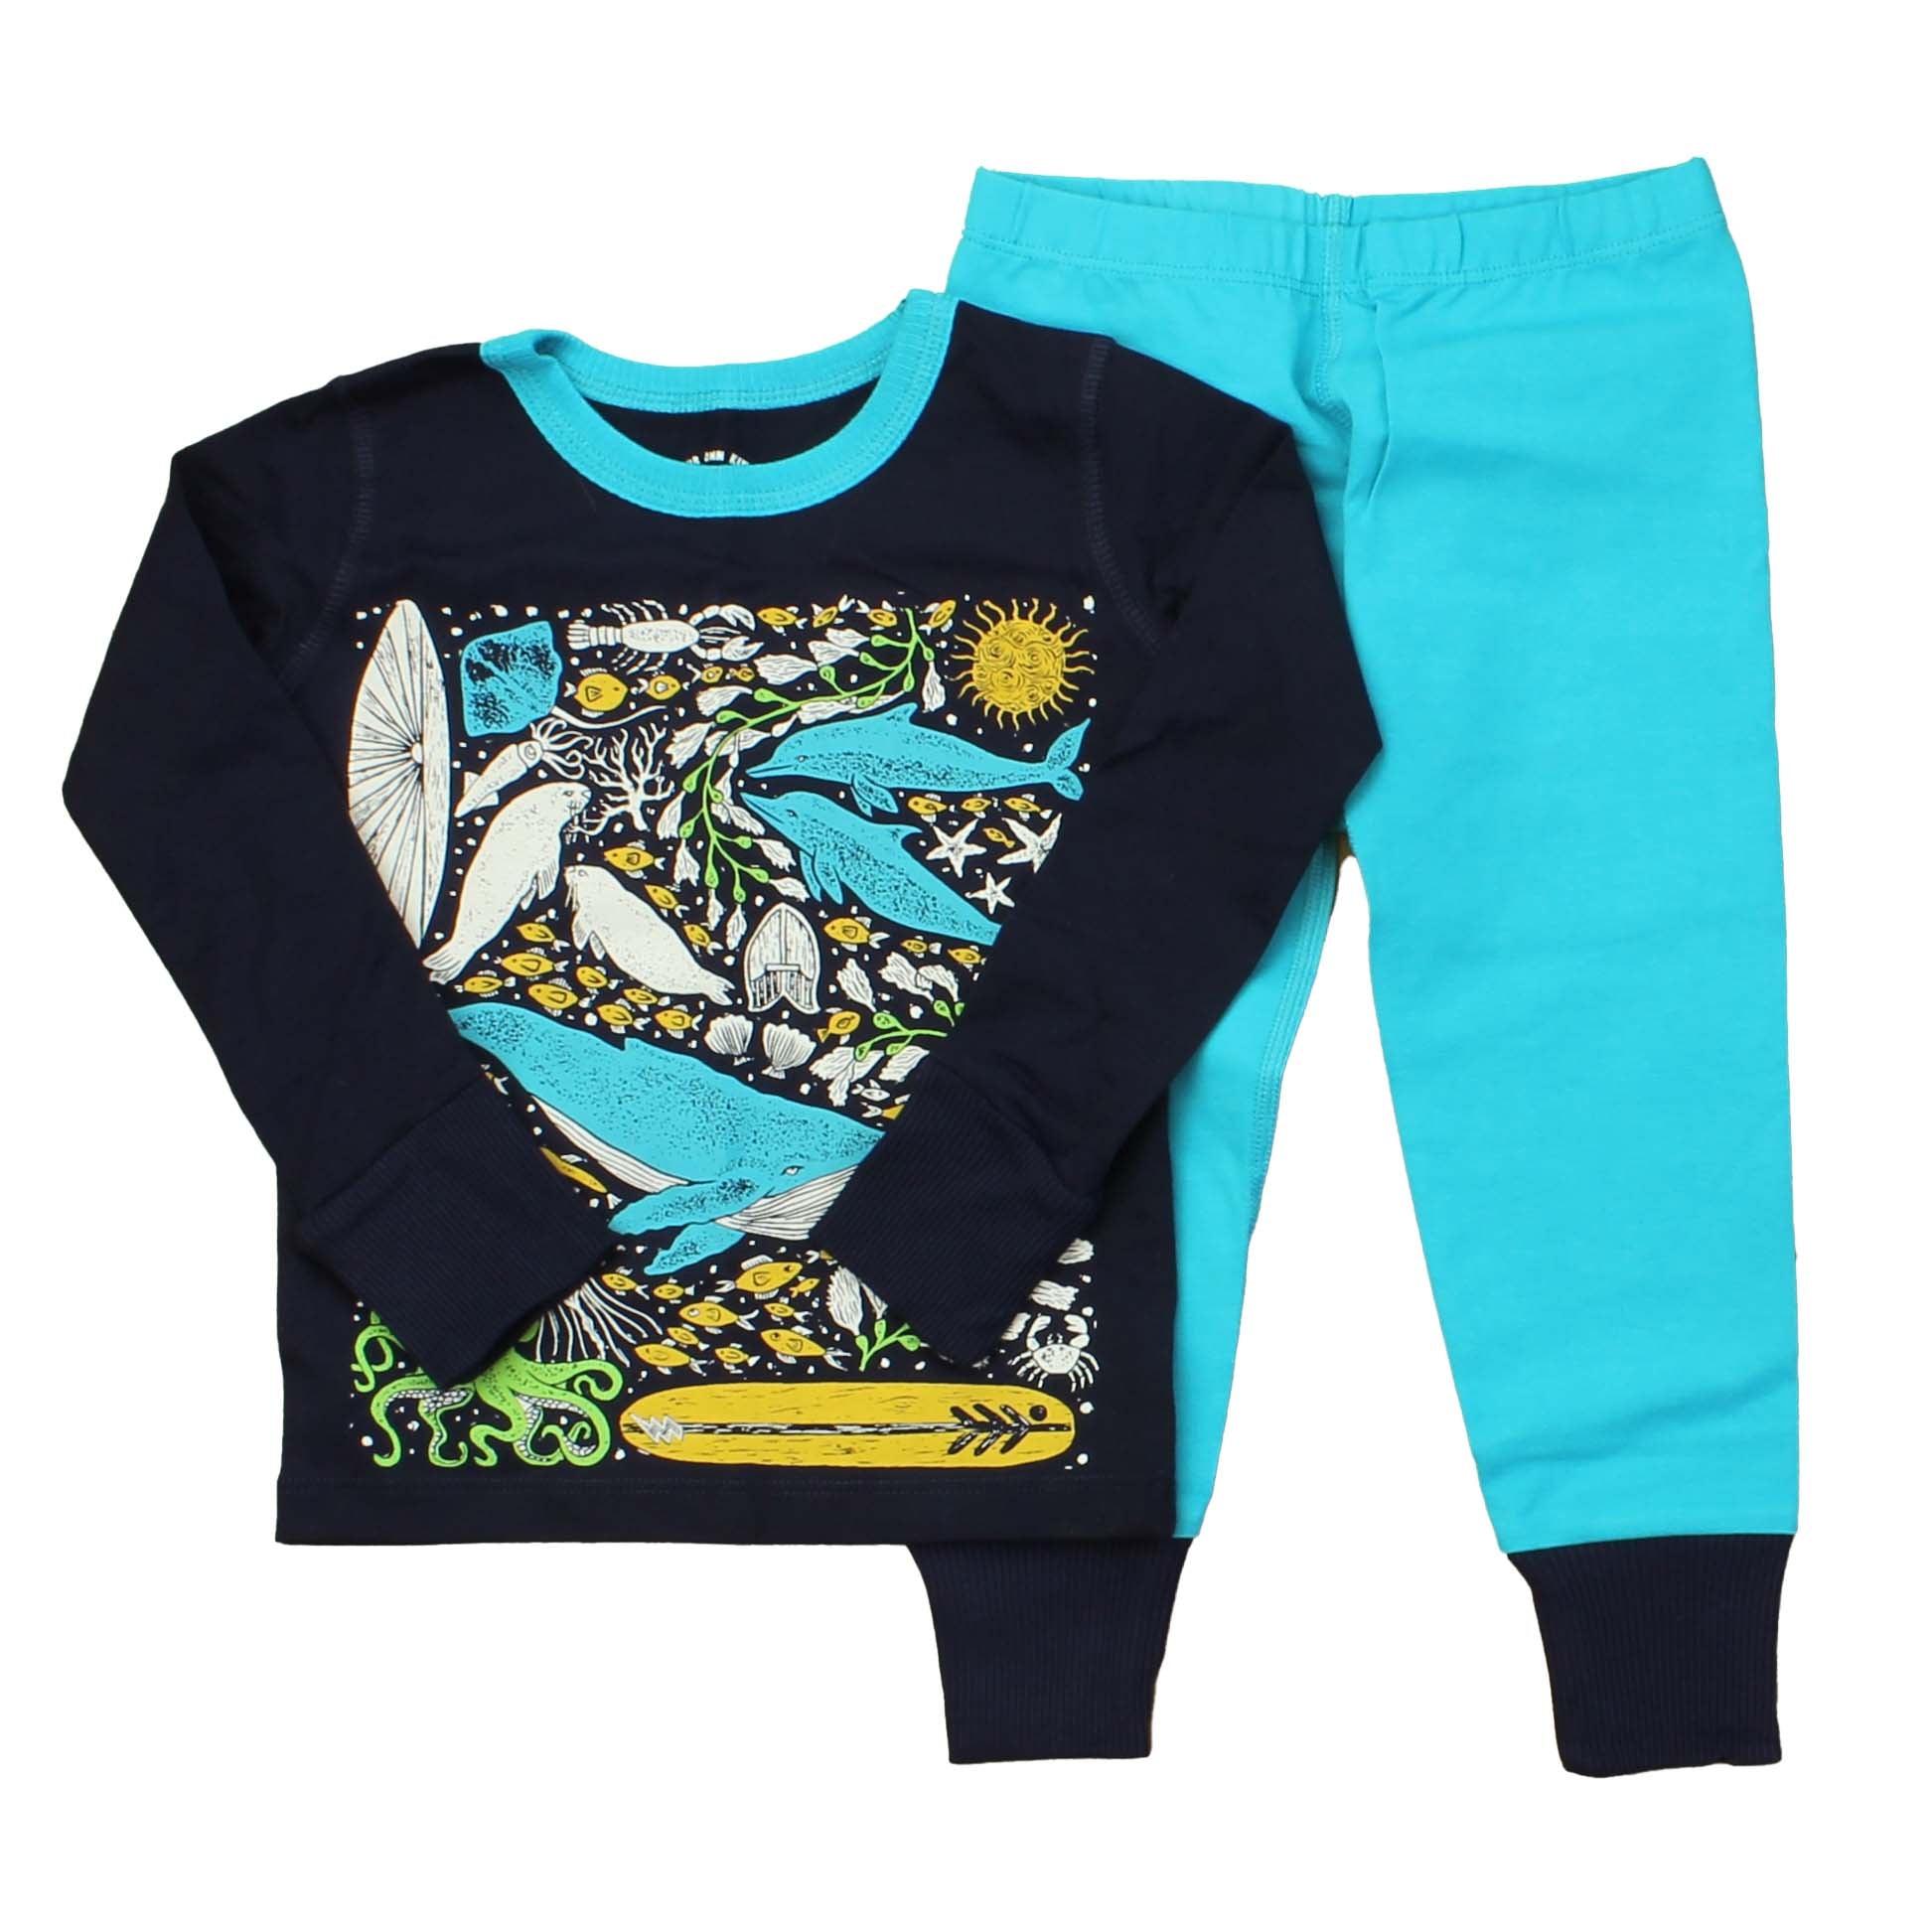 Pre-owned Navy | Turqouise | Marine Life PJ Set size: 2T